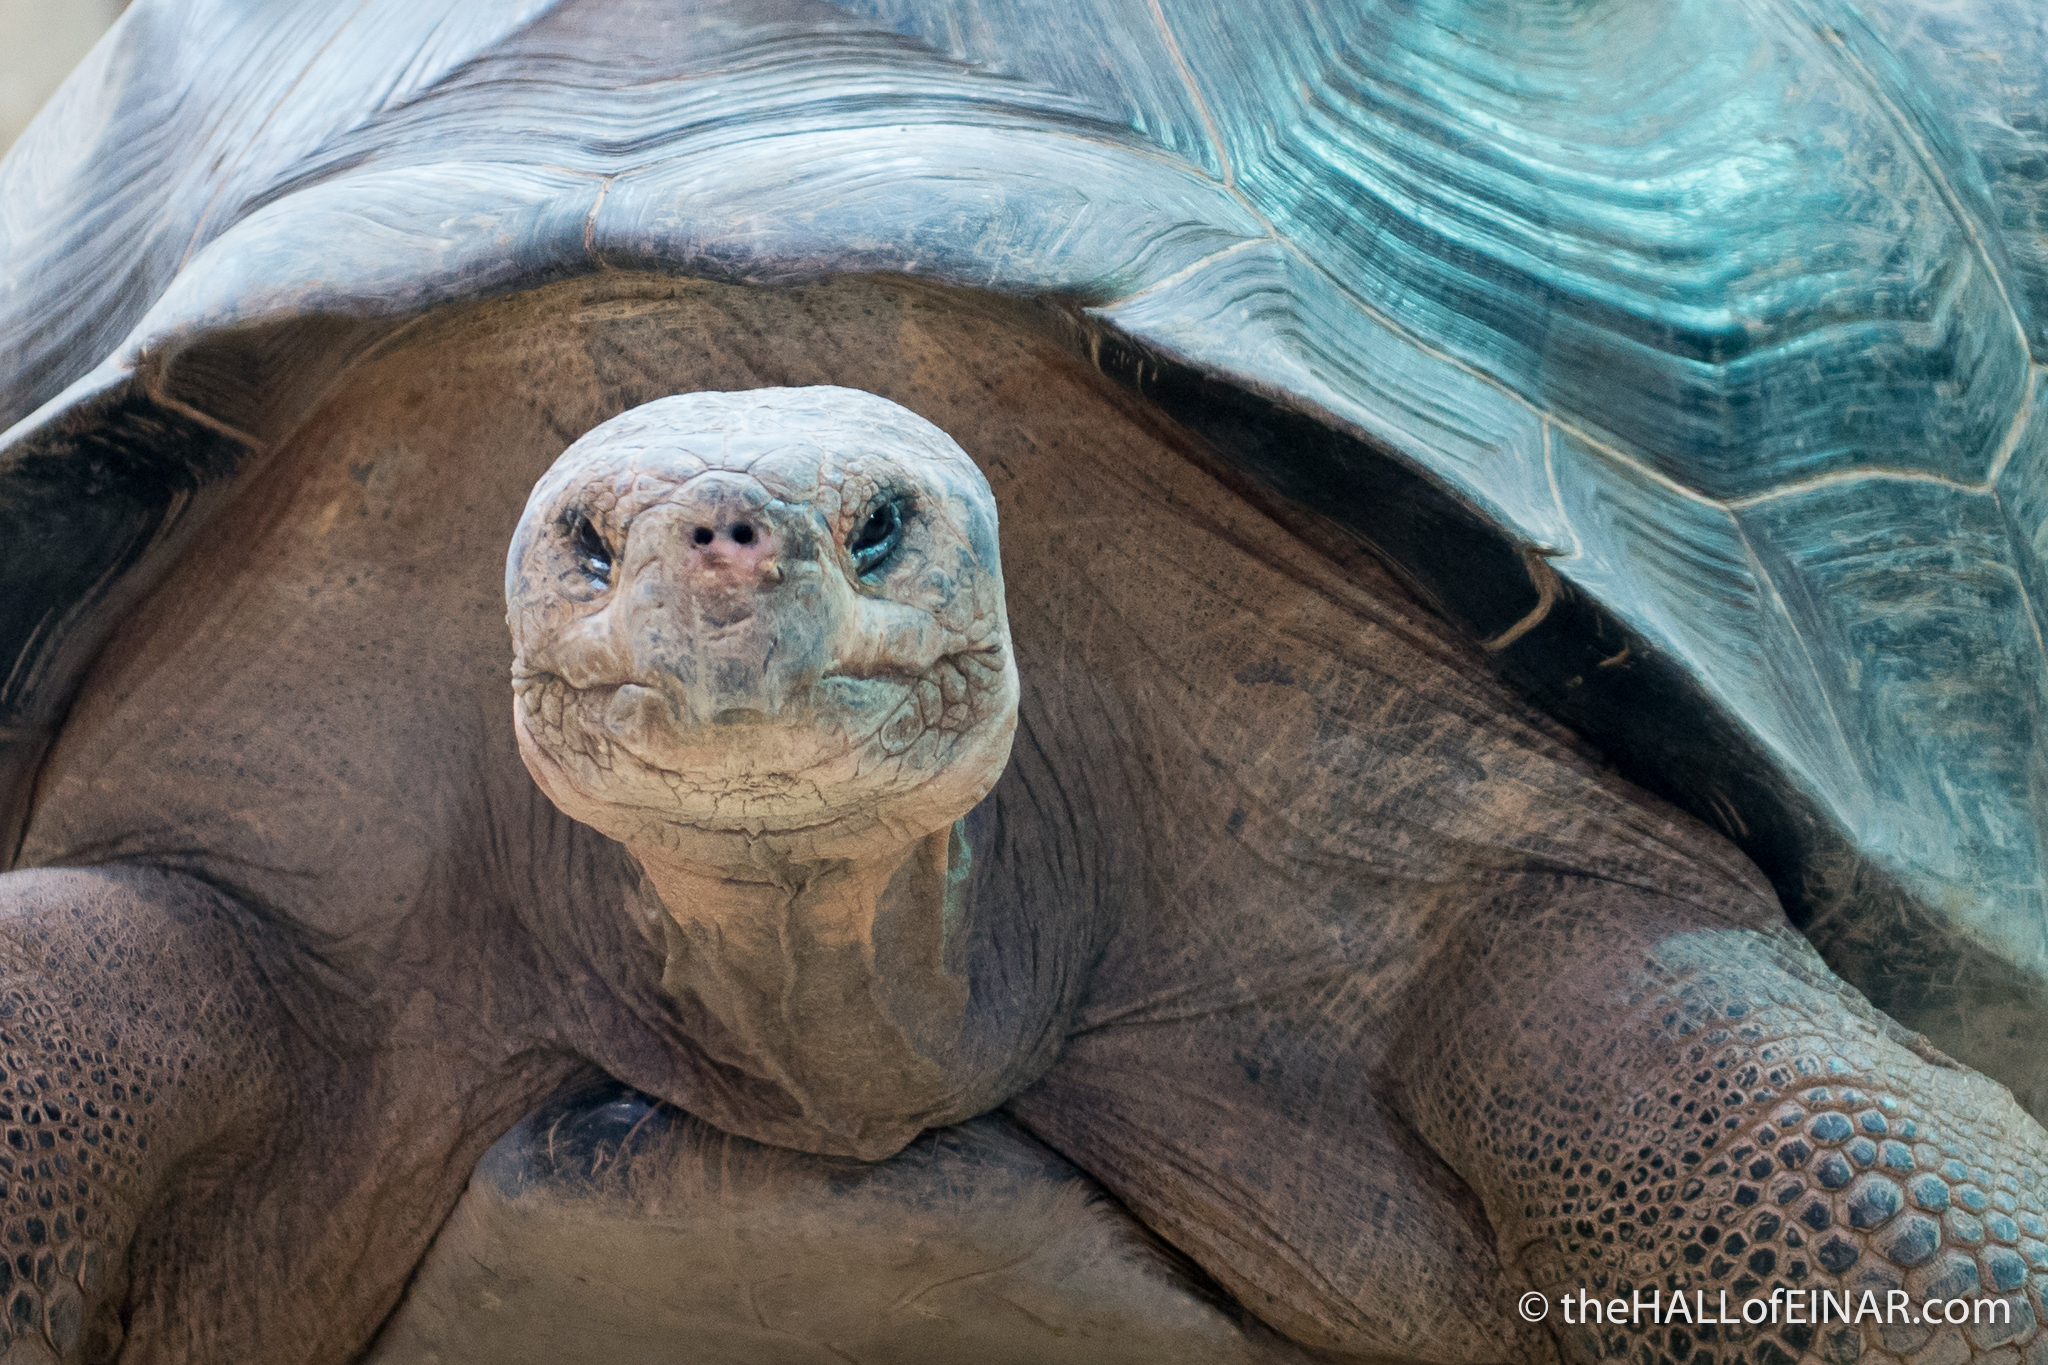 Galapagos Giant Tortoise - The Hall of Einar - photograph (c) David Bailey (not the)